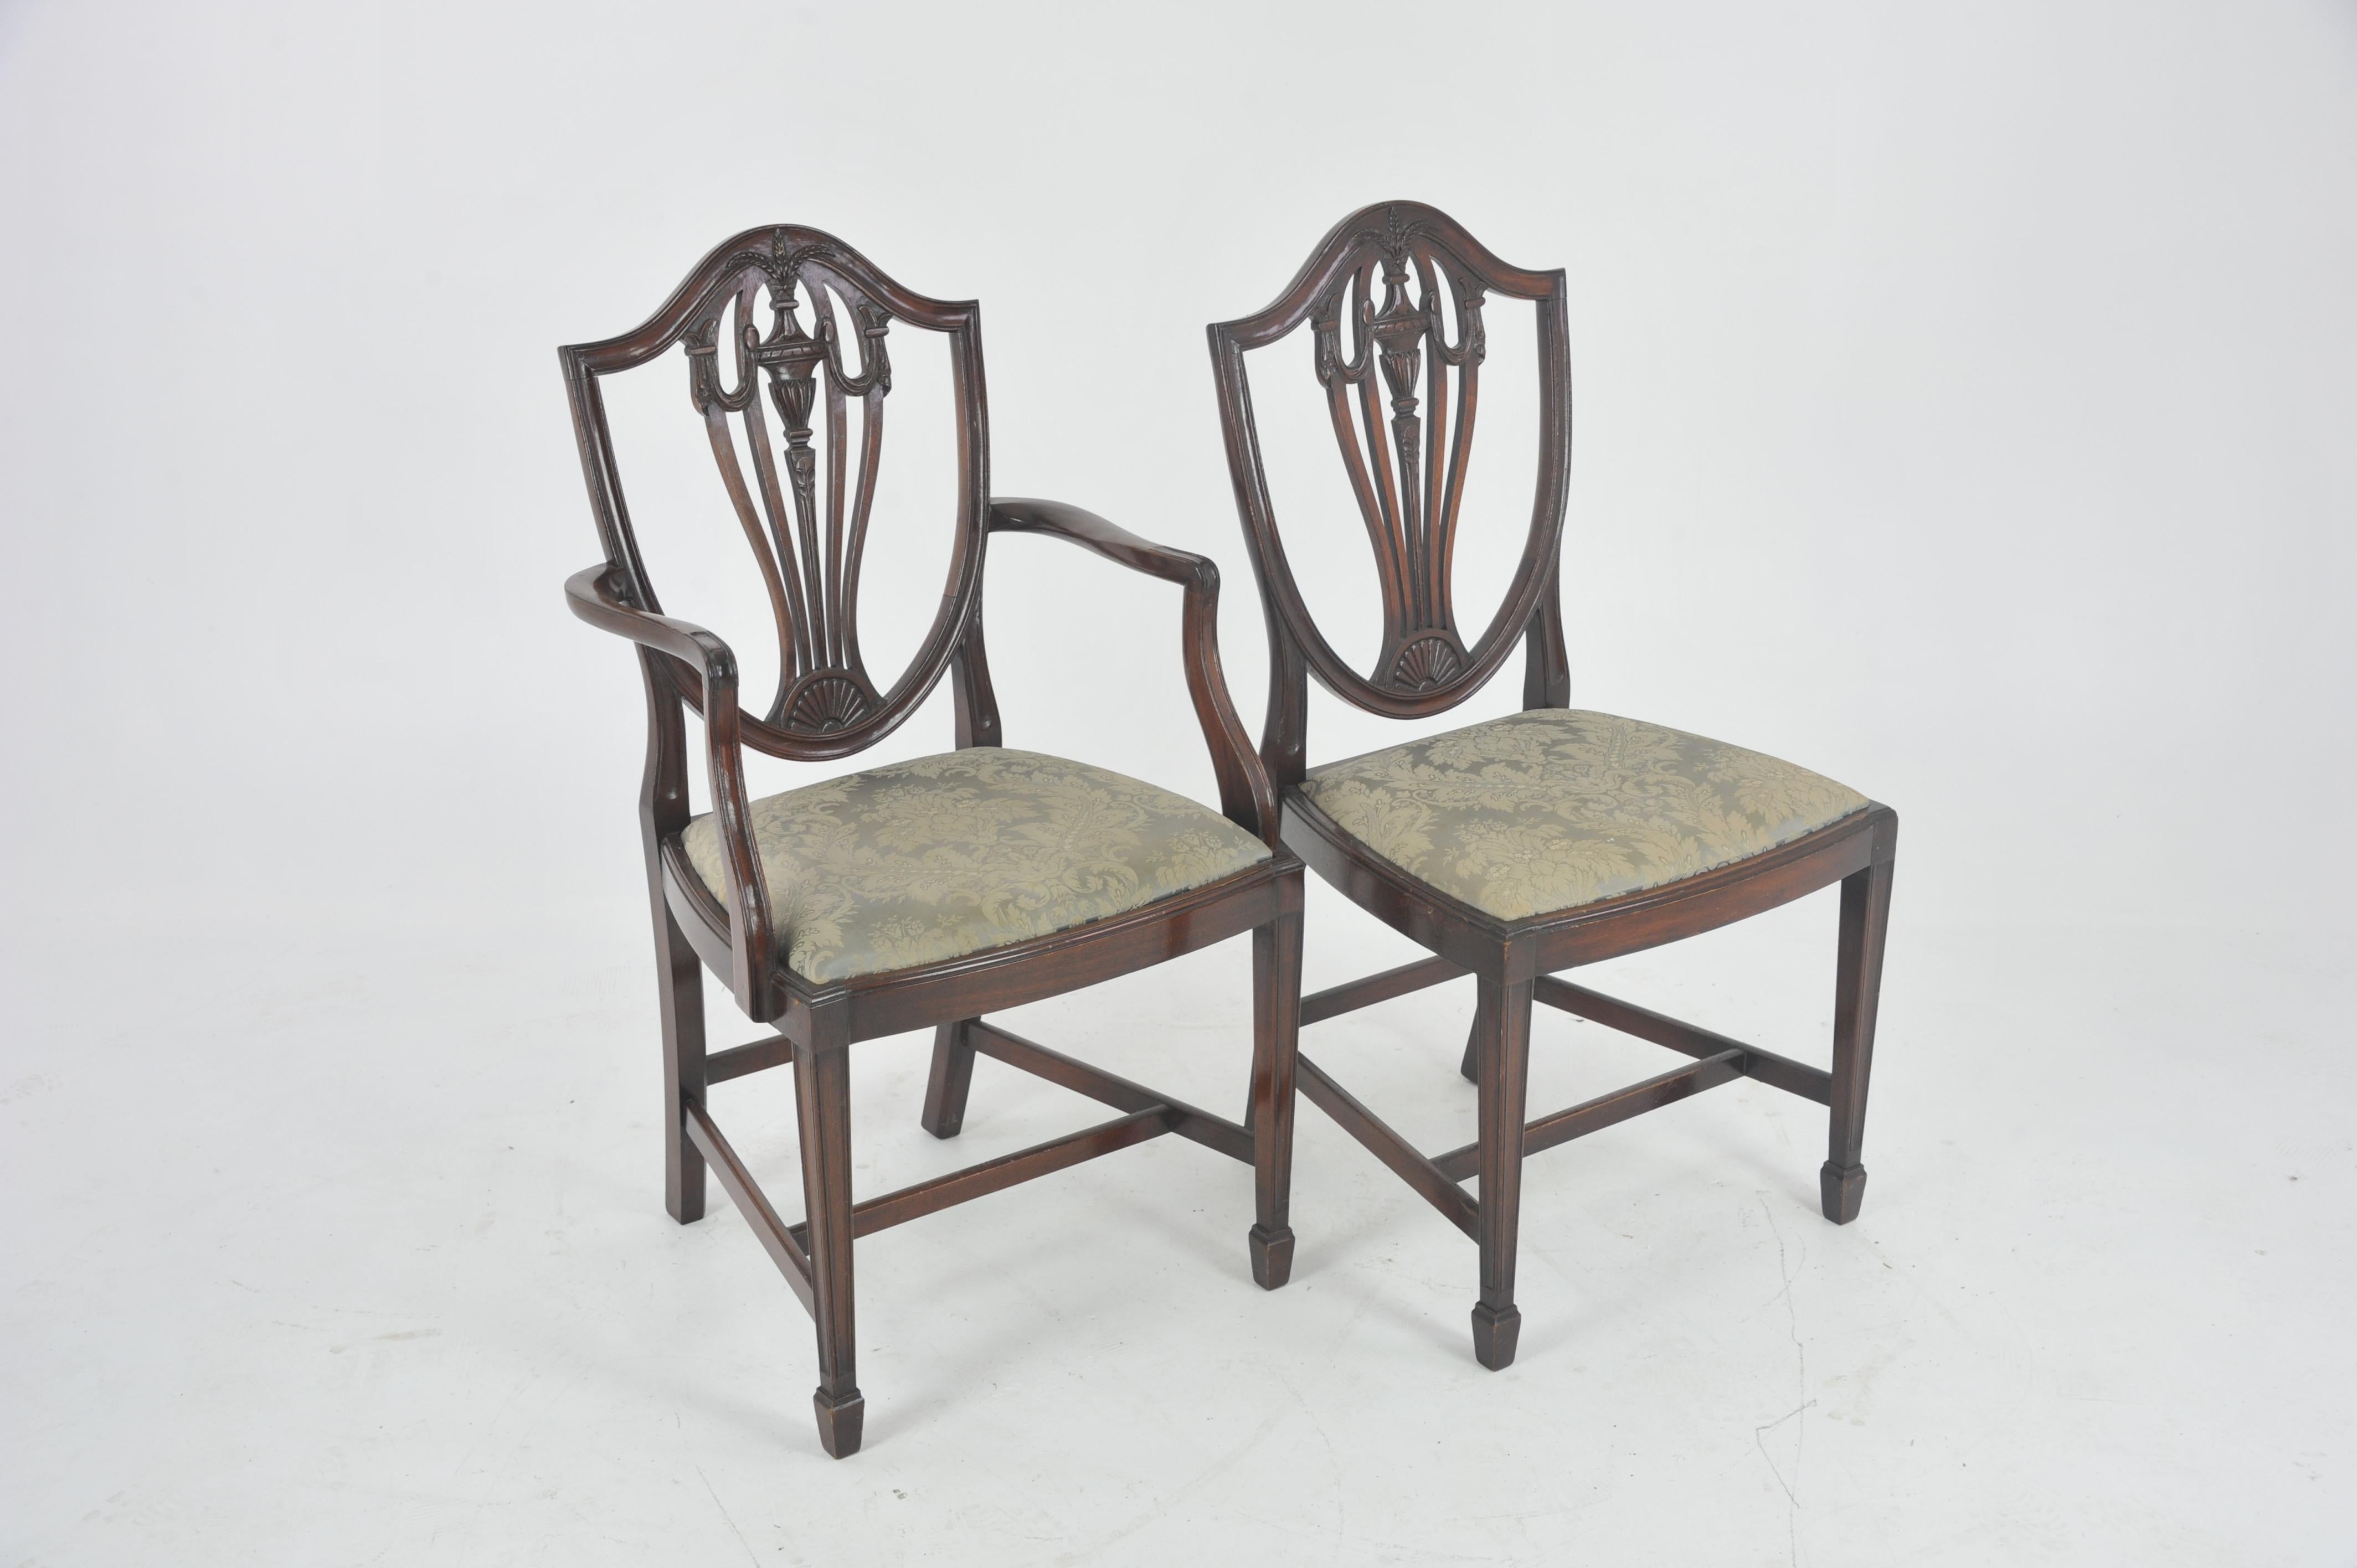 Twelve dining chairs, antique dining chairs, Hepplewhite chairs, walnut, Scotland 1930, Antique Furniture, B1071

Scotland, 1930
Solid walnut with original finish
Ten single and two armchairs
The backs are well carved with wheat sheaf